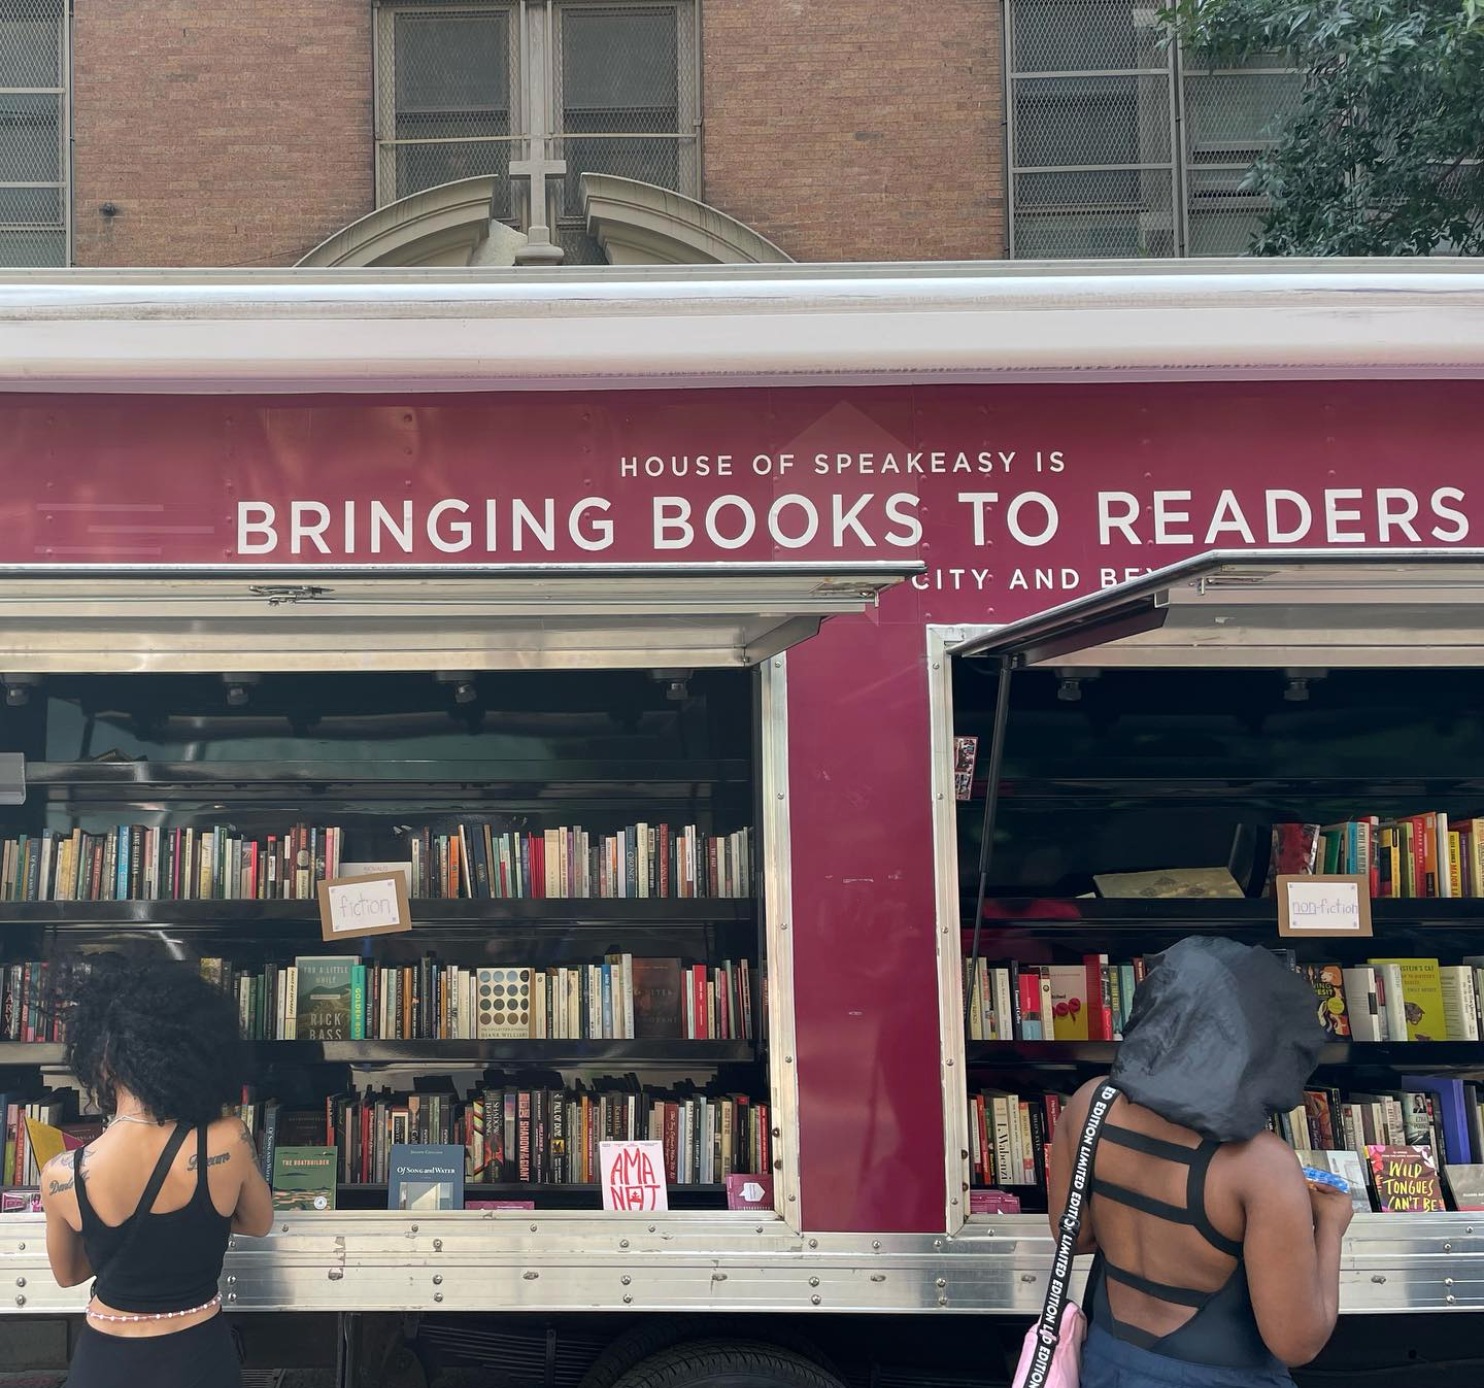 House of SpeakEasy's Bookmobile, parked on a sunny street behind a rack of bikes. A crowd of people is gathered by the Bookmobile's shelves, choosing their books.